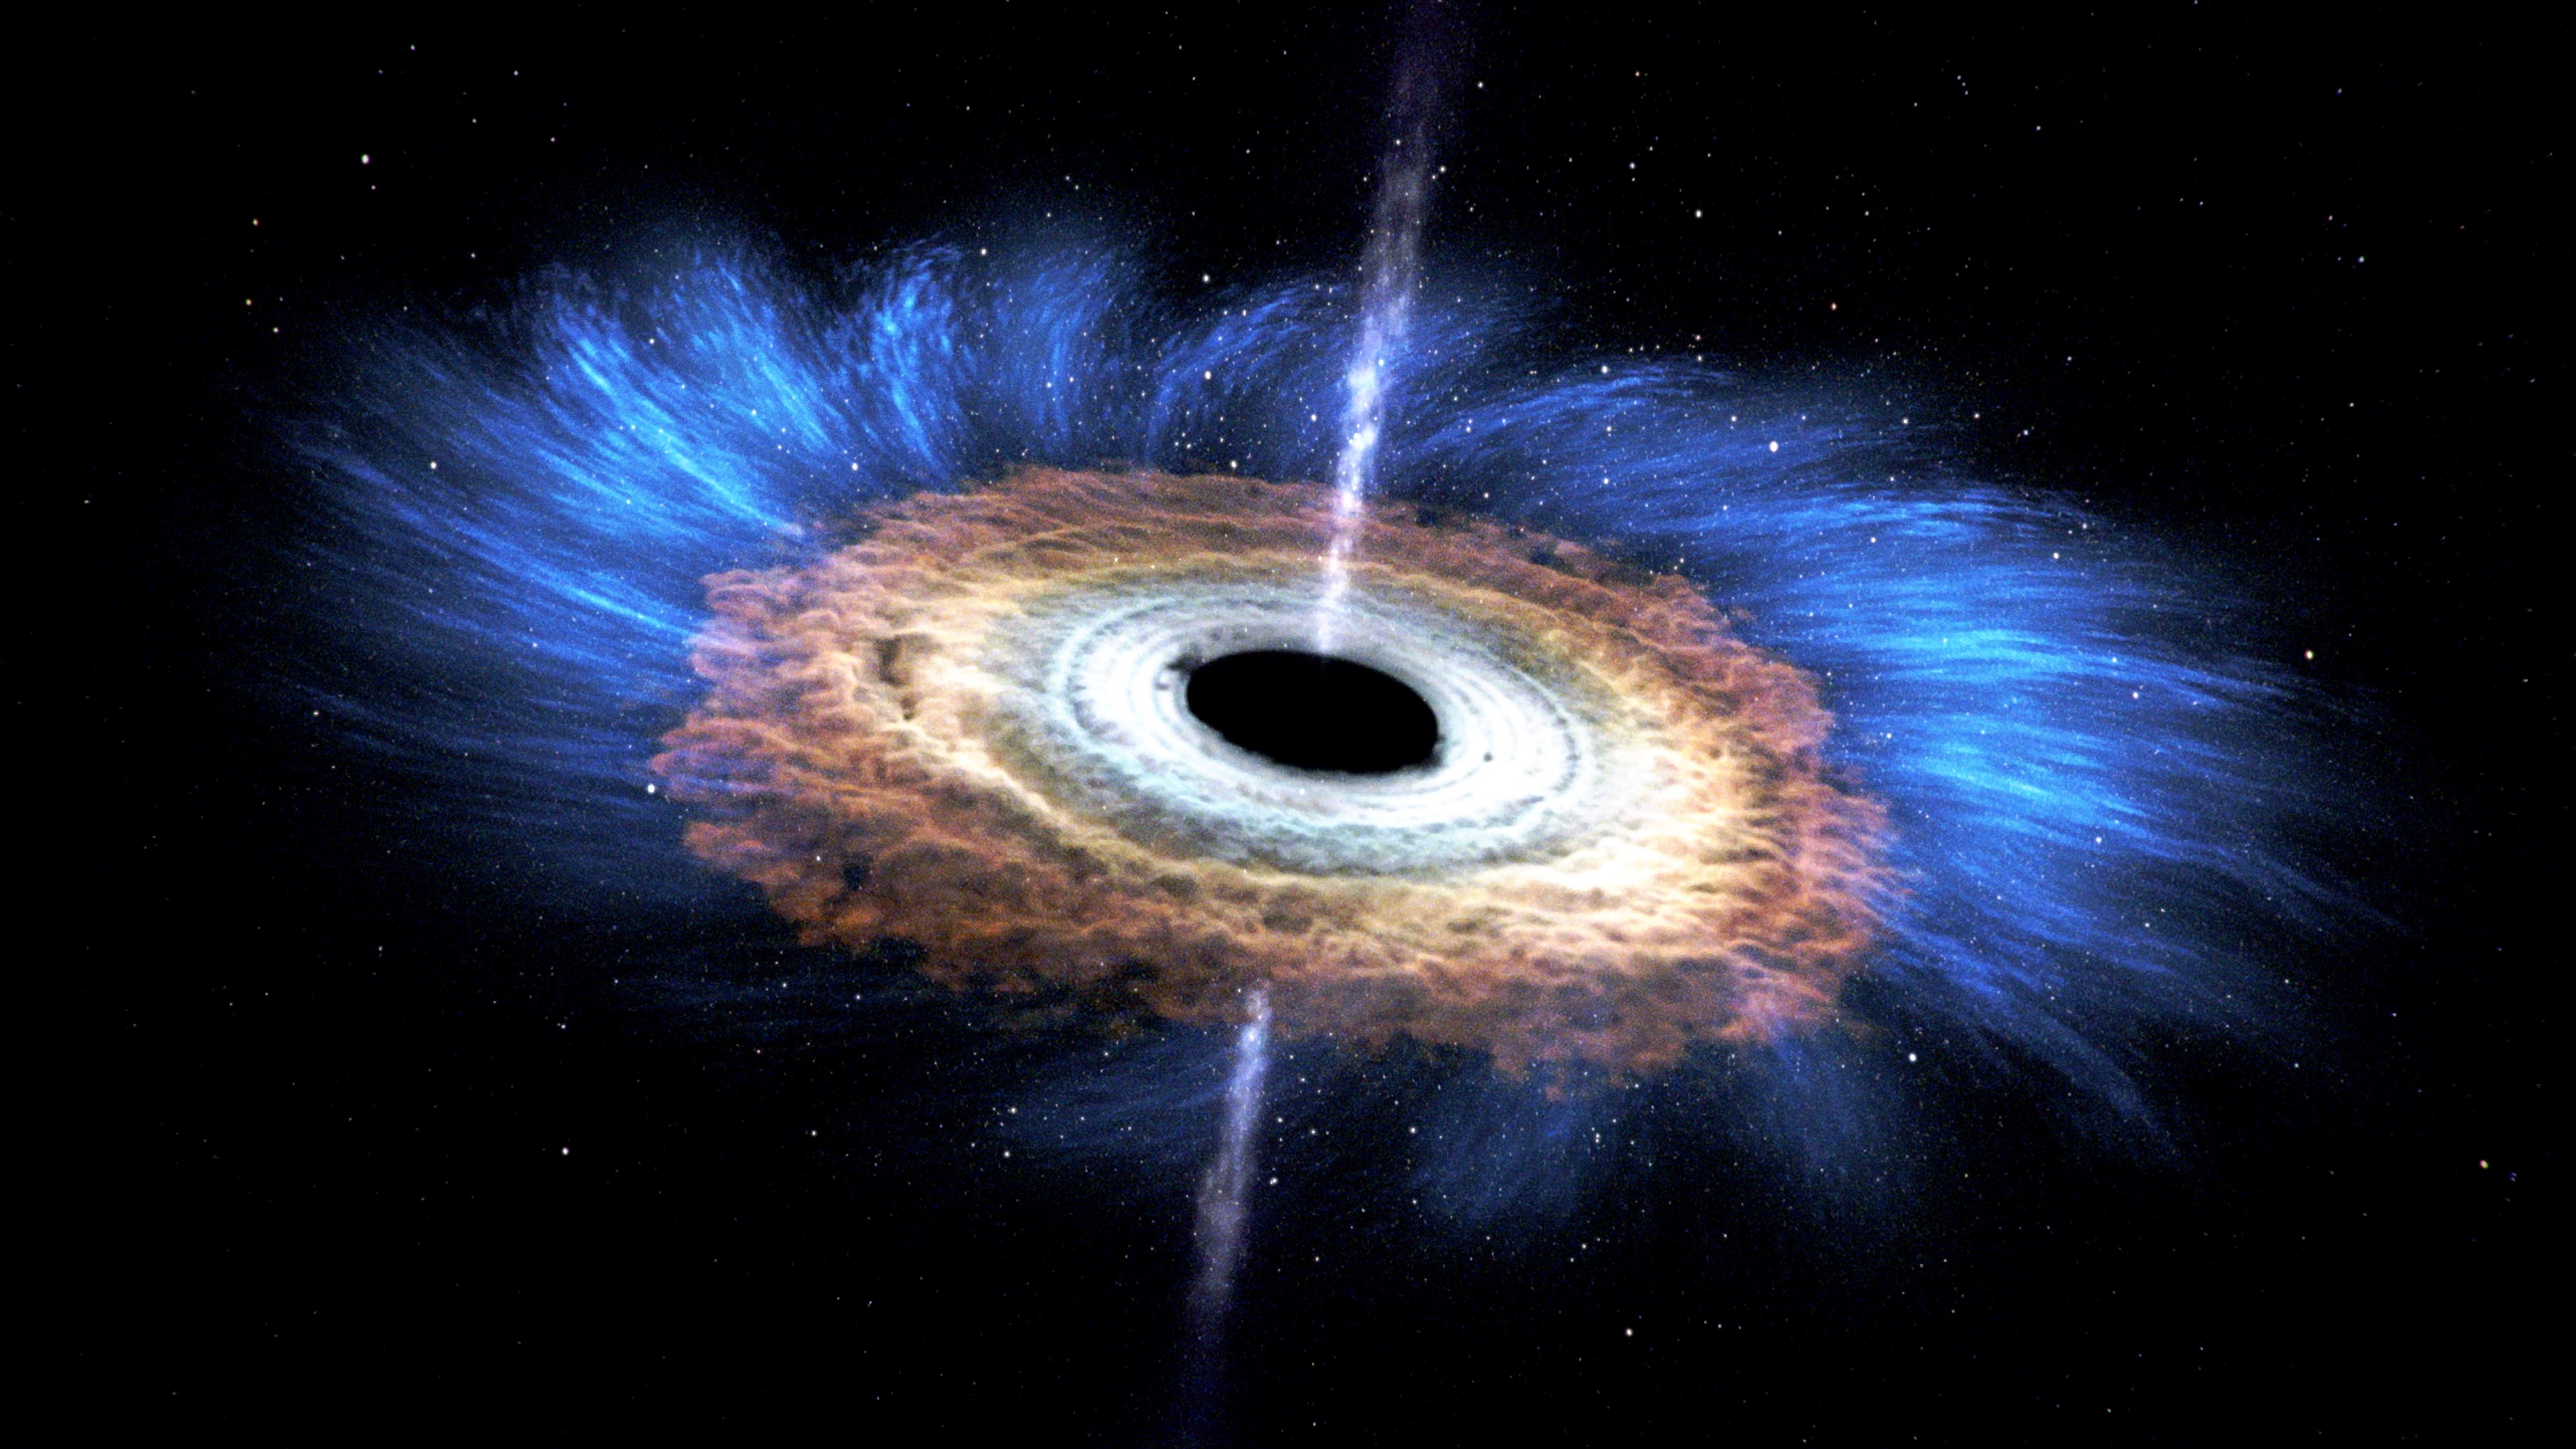 would you die if you went into a black hole